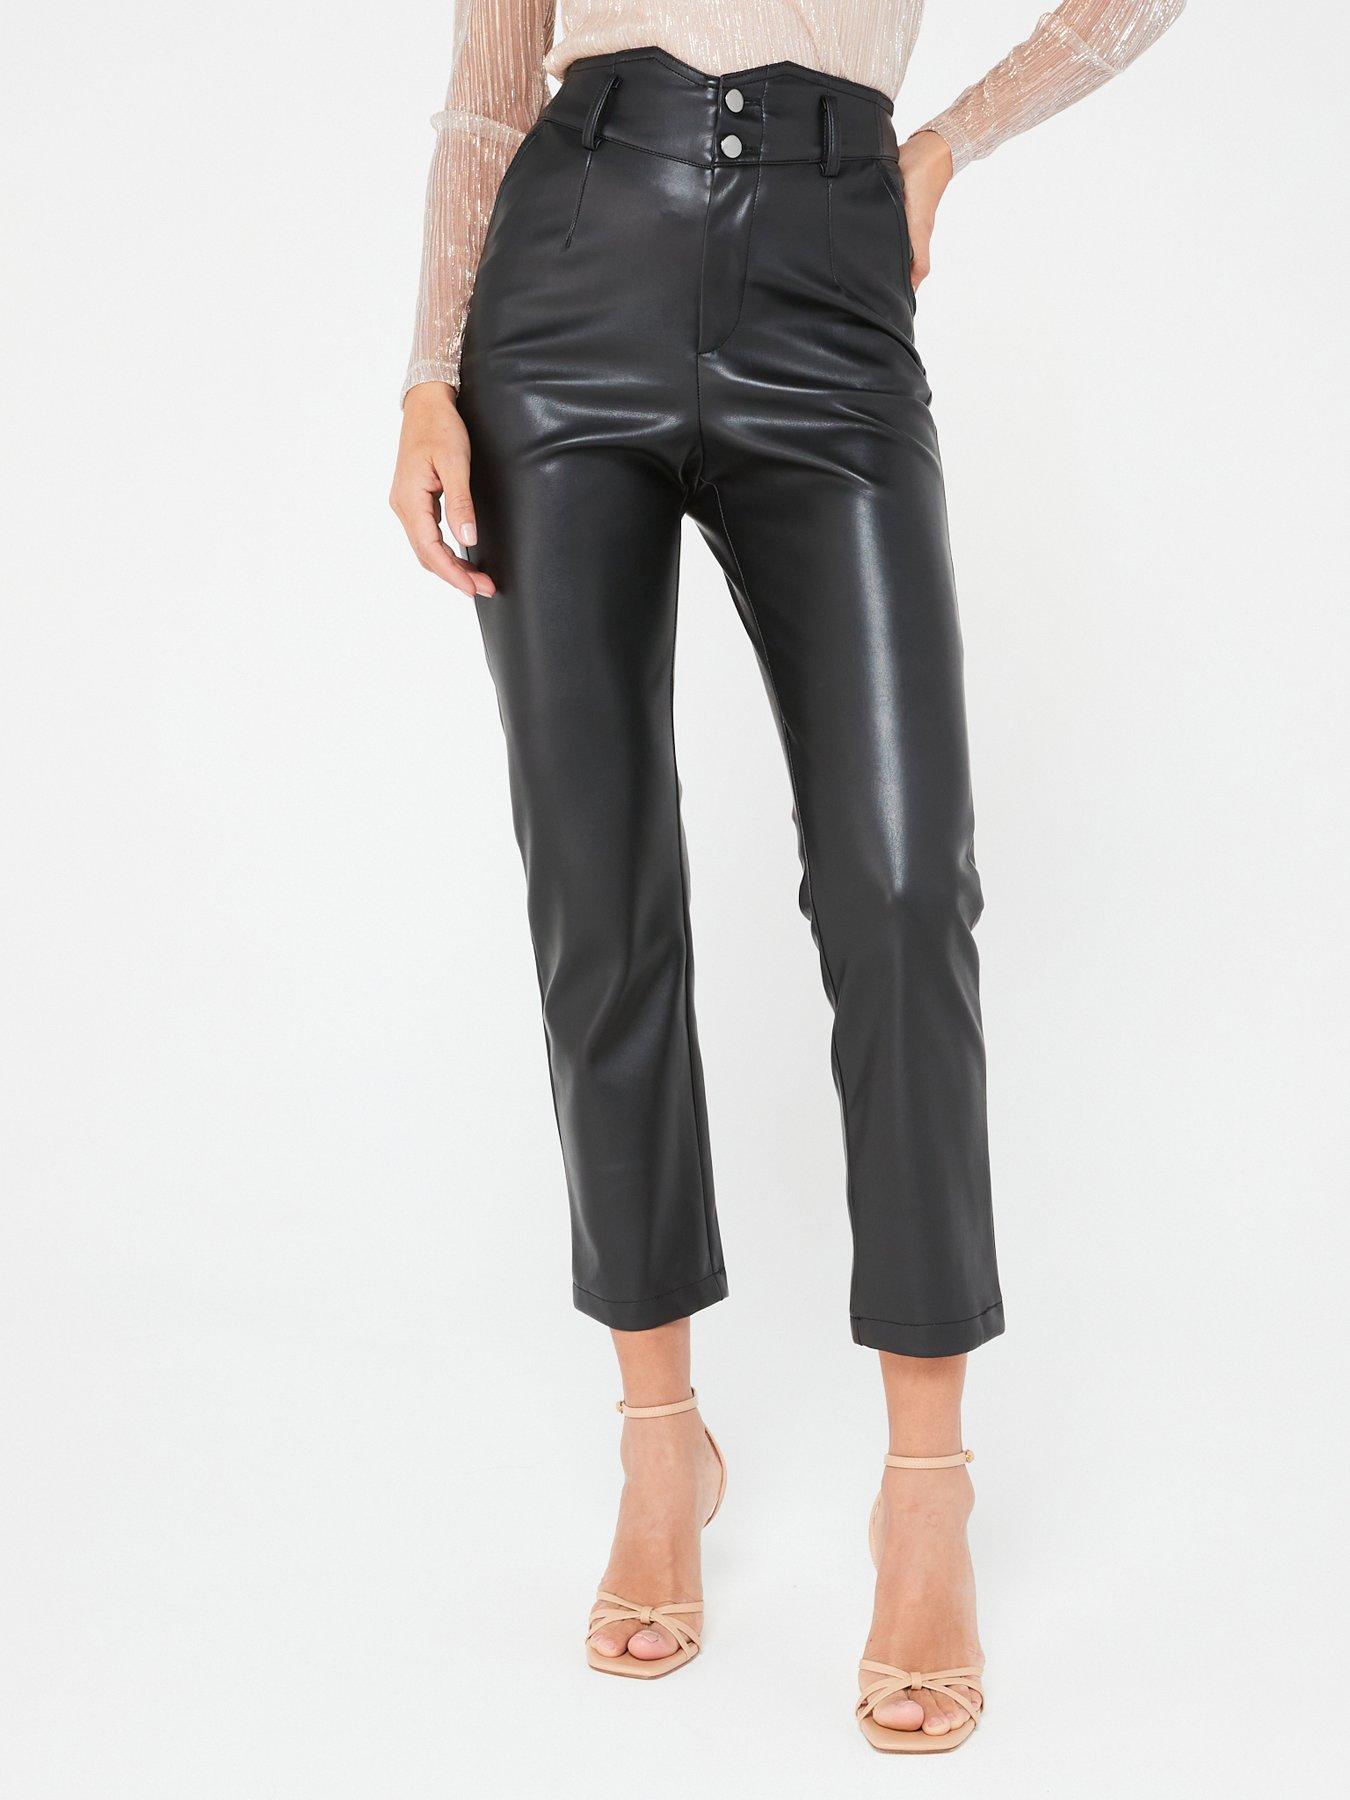 Leather trousers Just Female Black size 0 US in Leather - 26598567